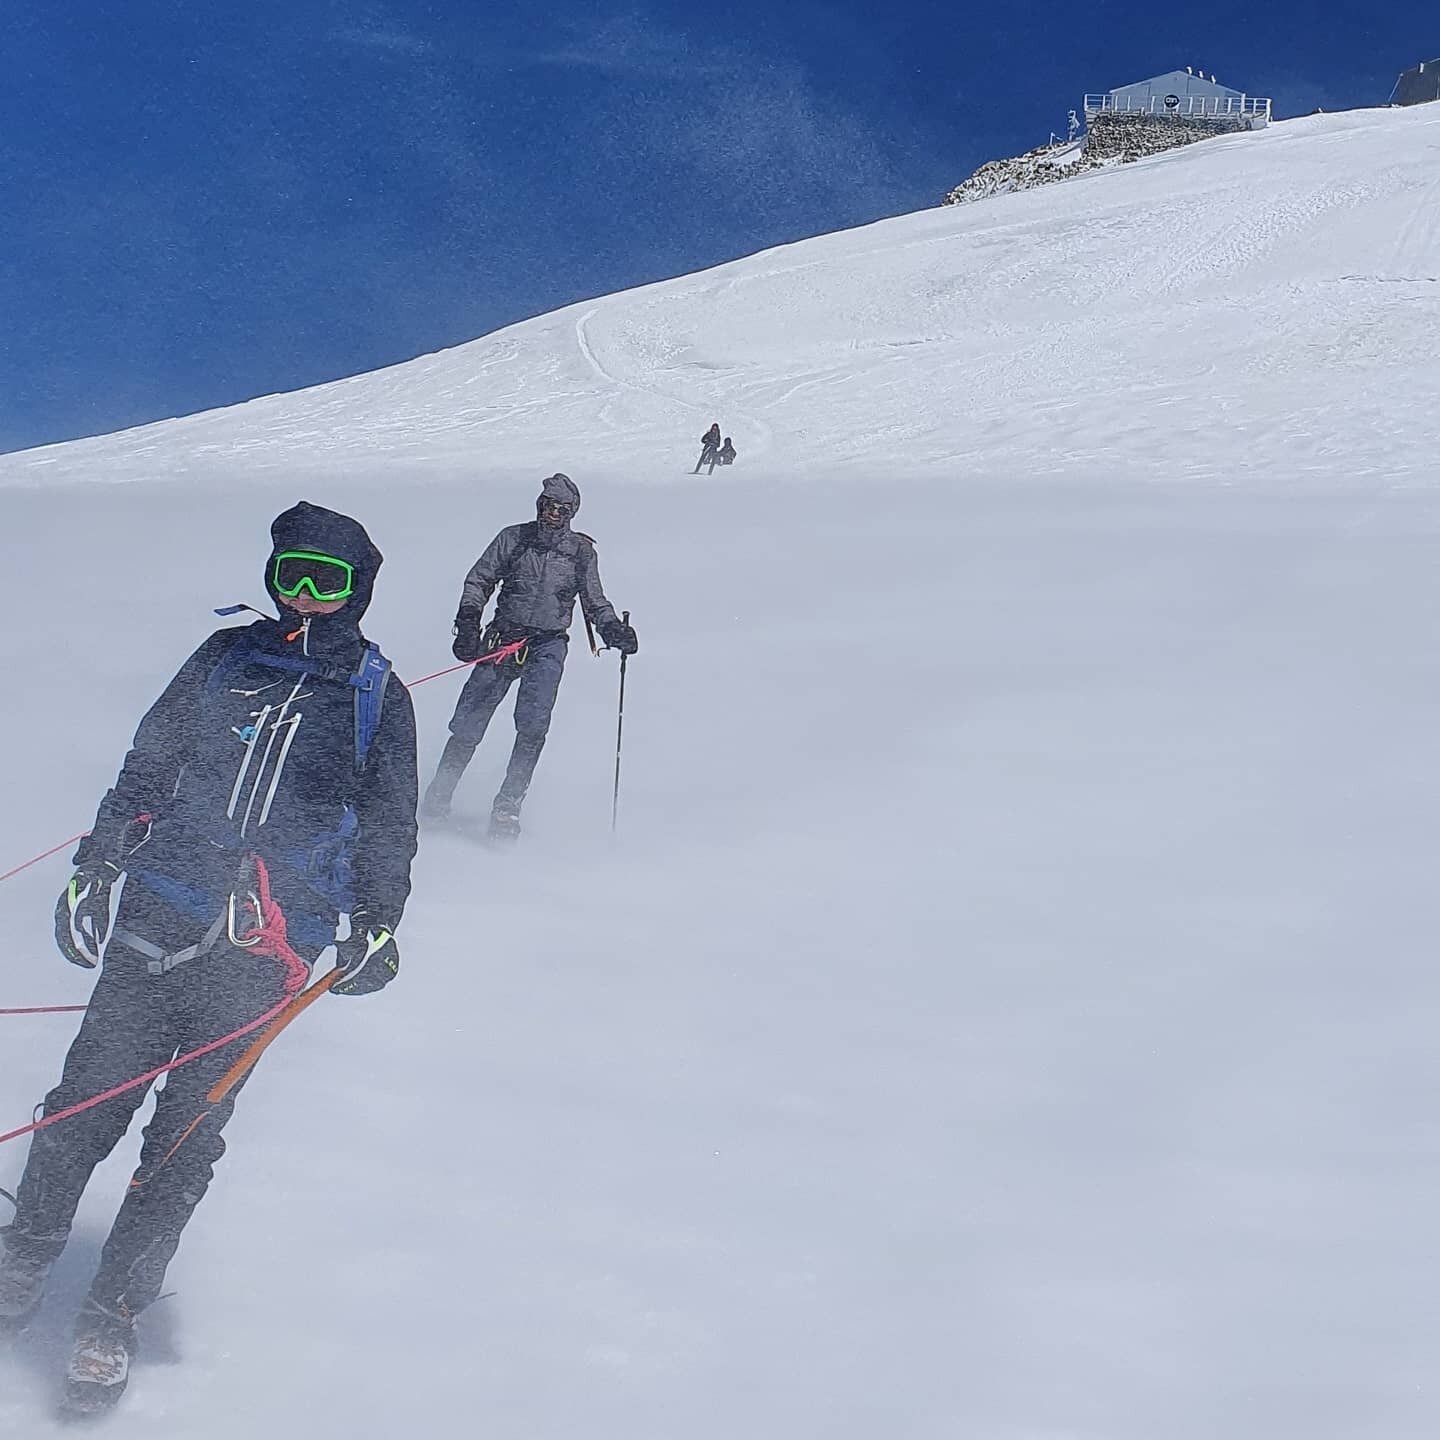 Our Mont Blanc week with 'Red' and 'Hof' kept us all on our toes in terms of finding the right weather window for the summit🤔. Whilst introducing them both to crampons and scrambling whilst we acclimatised, the window of opportunity looked promising